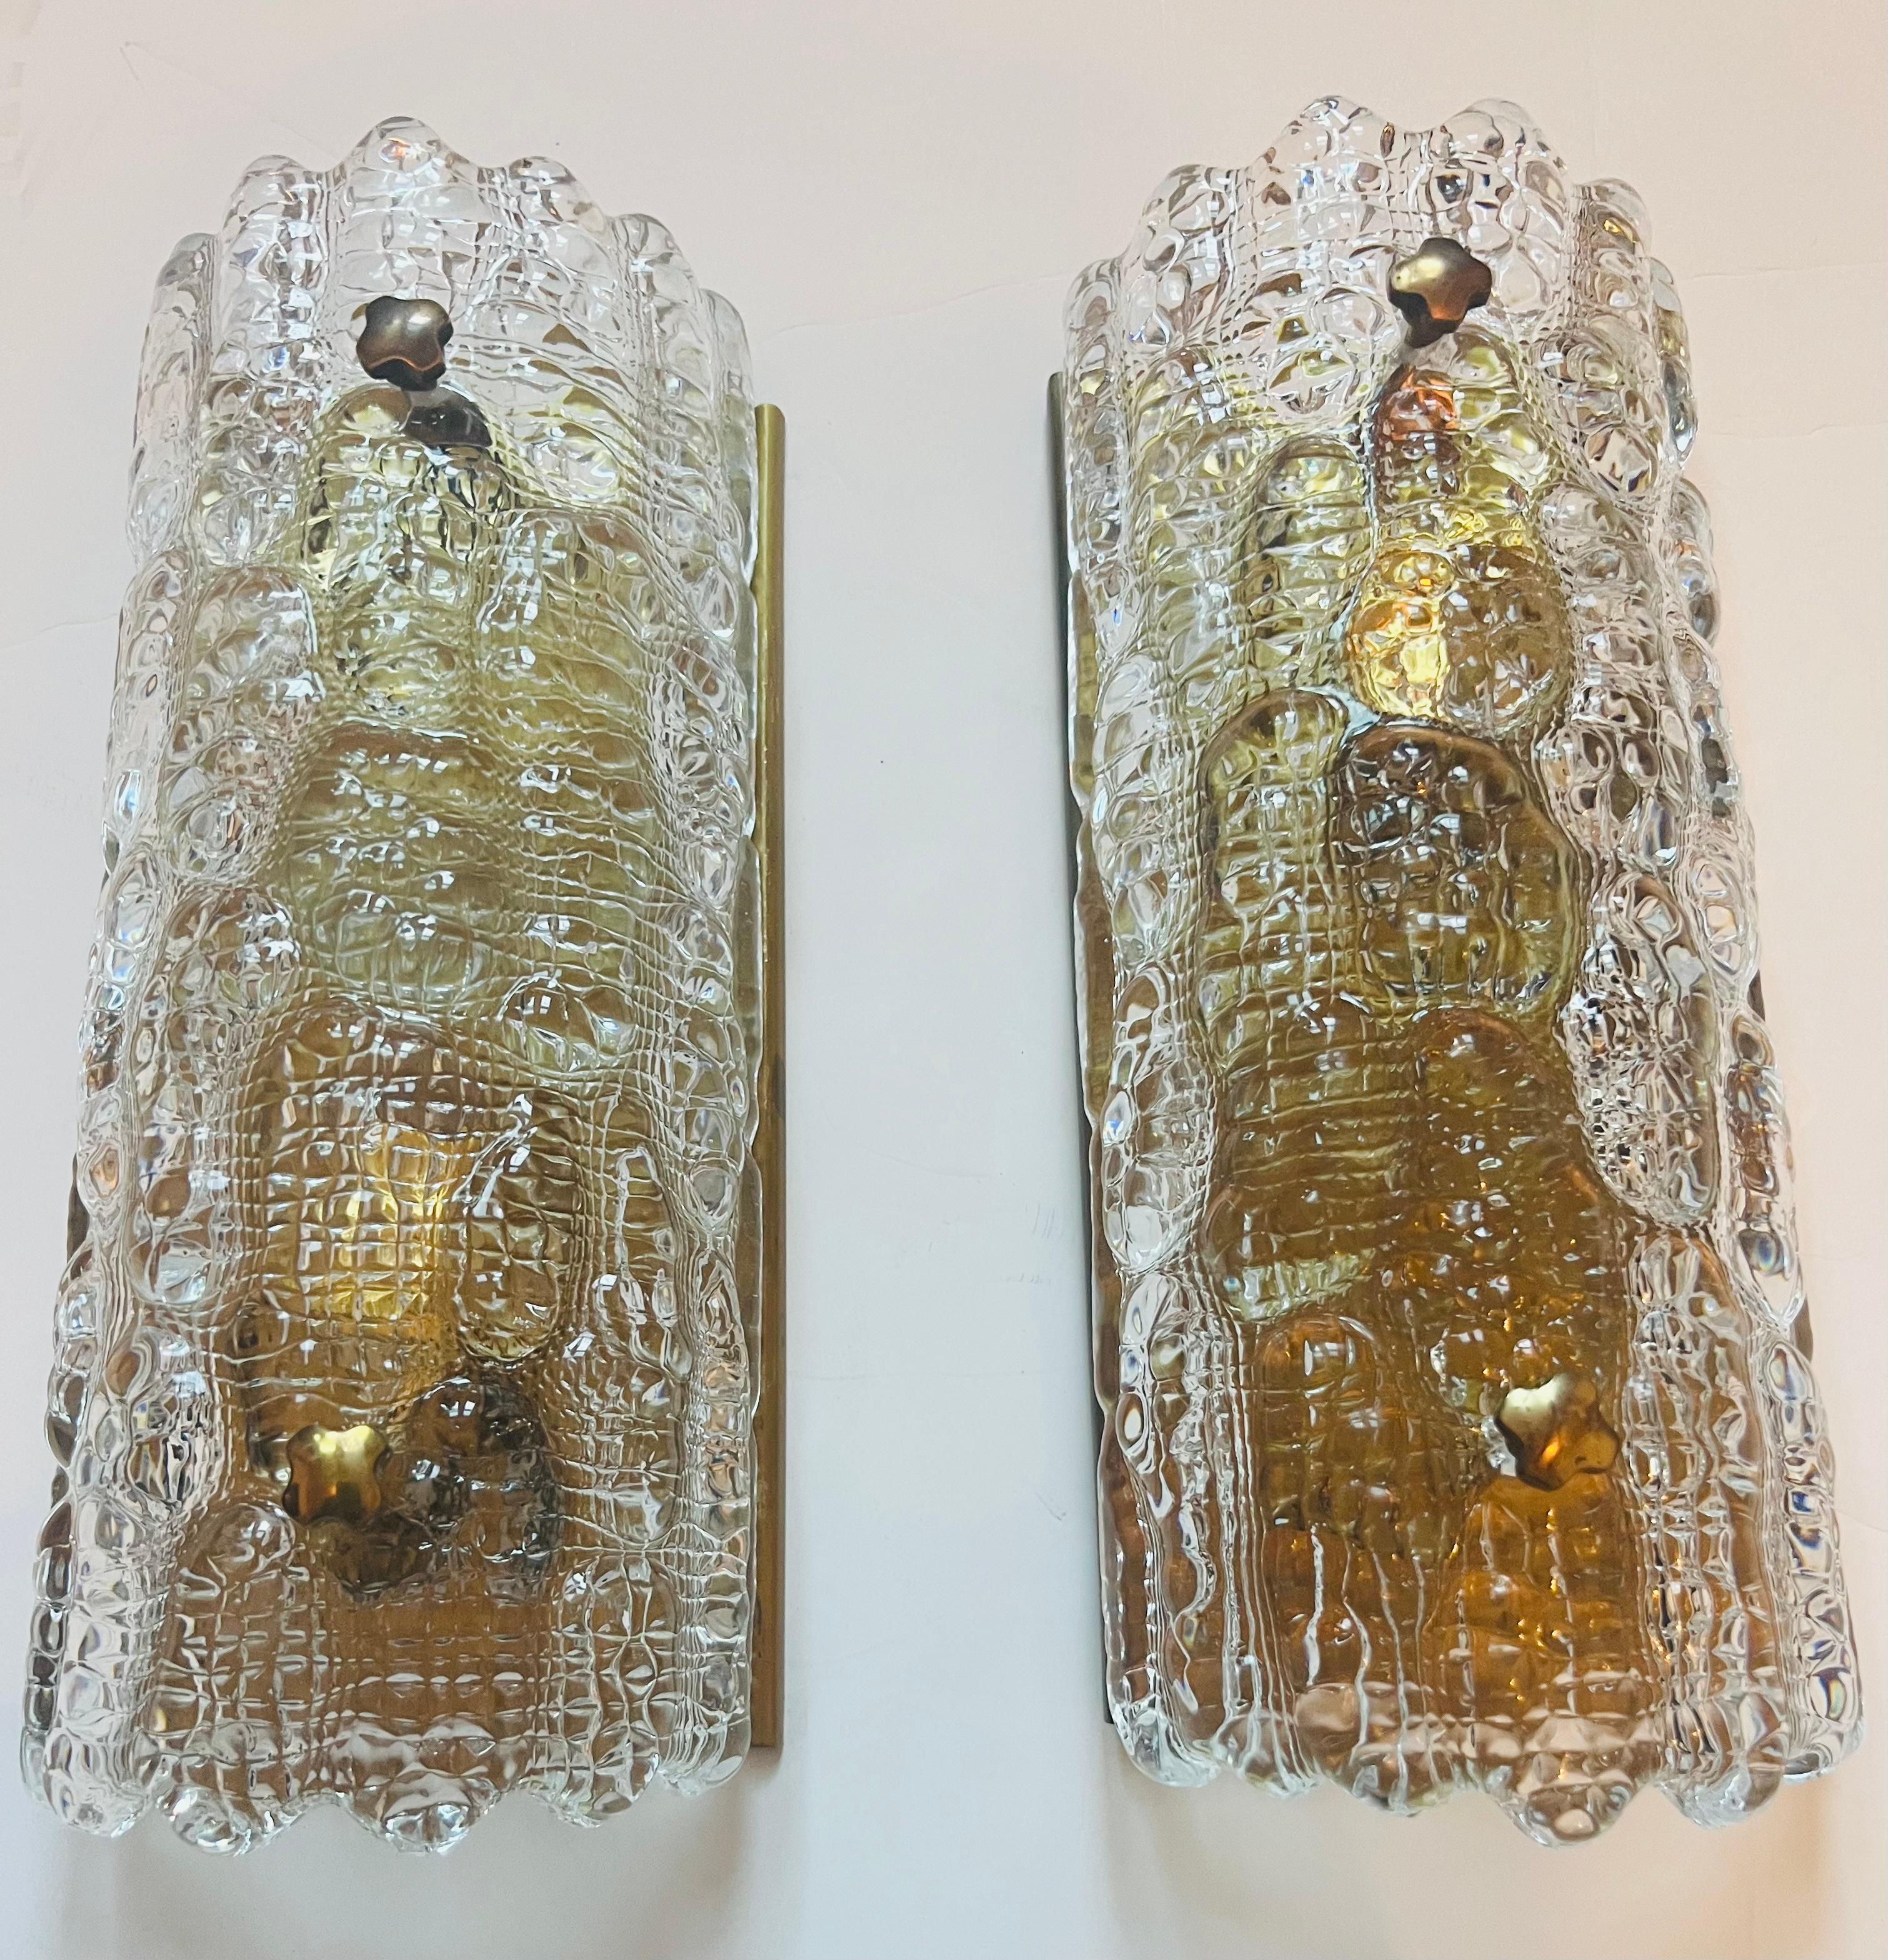 A luxurious pair of 1950s Swedish crystal wall lamps with thick glass shades and aged brass fixtures and decorative fittings by Carl Fagerlund for Orrefors. Rewired. Candelabra socket.